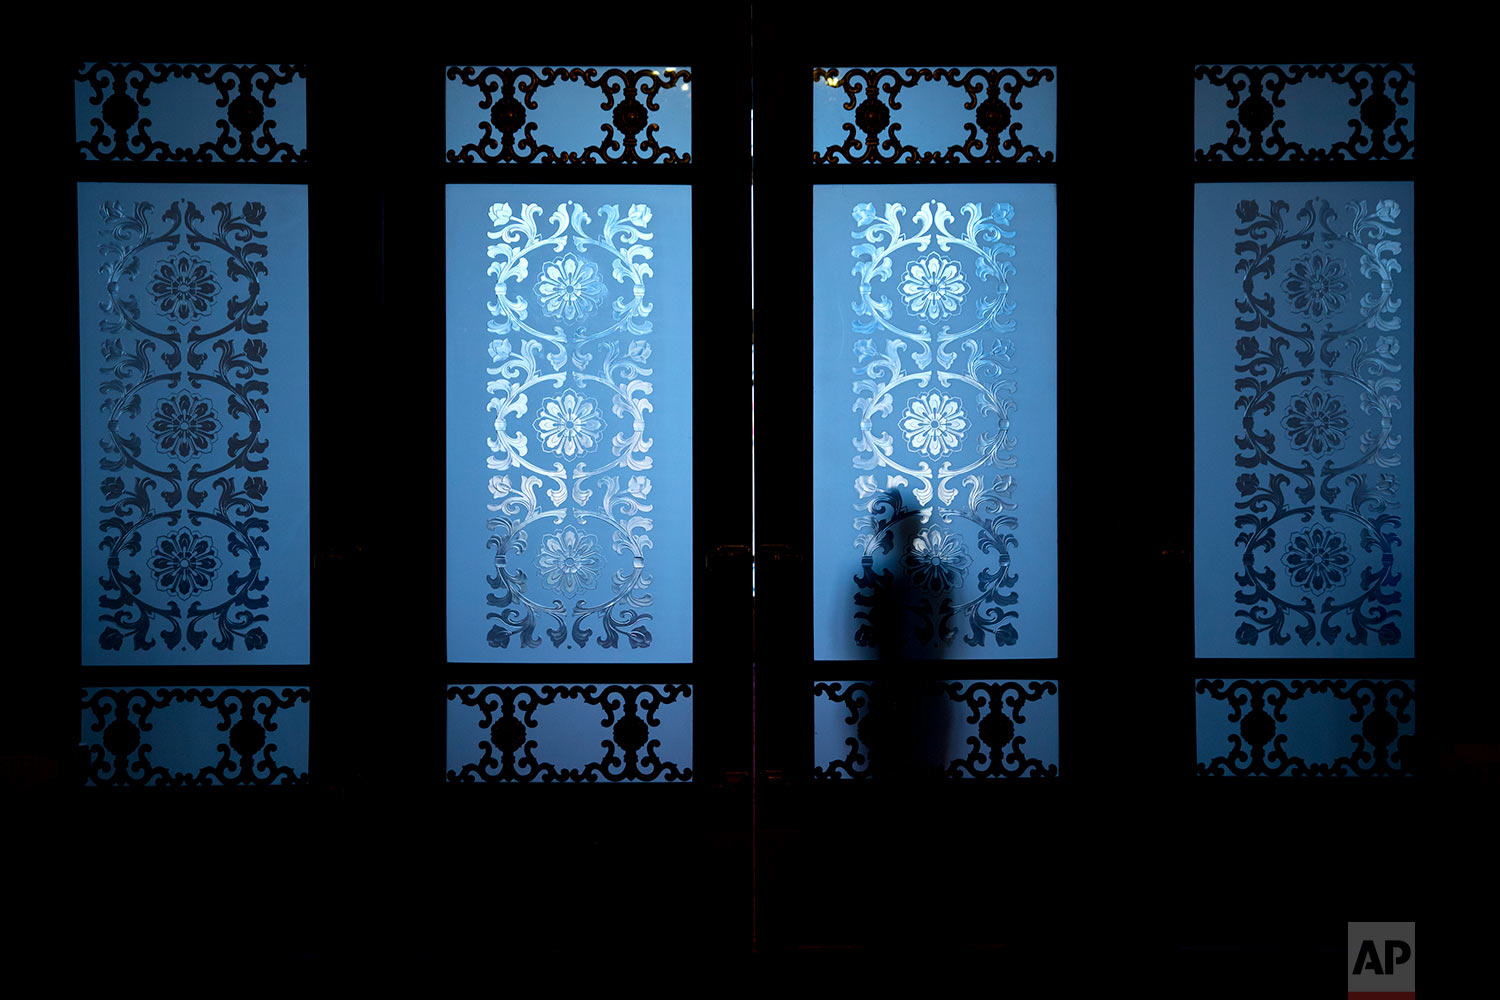  In this Friday, March 2, 2018 photo, a security official is silhouetted as he stands behind frosted glass doors at the Great Hall of the People in Beijing. (AP Photo/Mark Schiefelbein) 